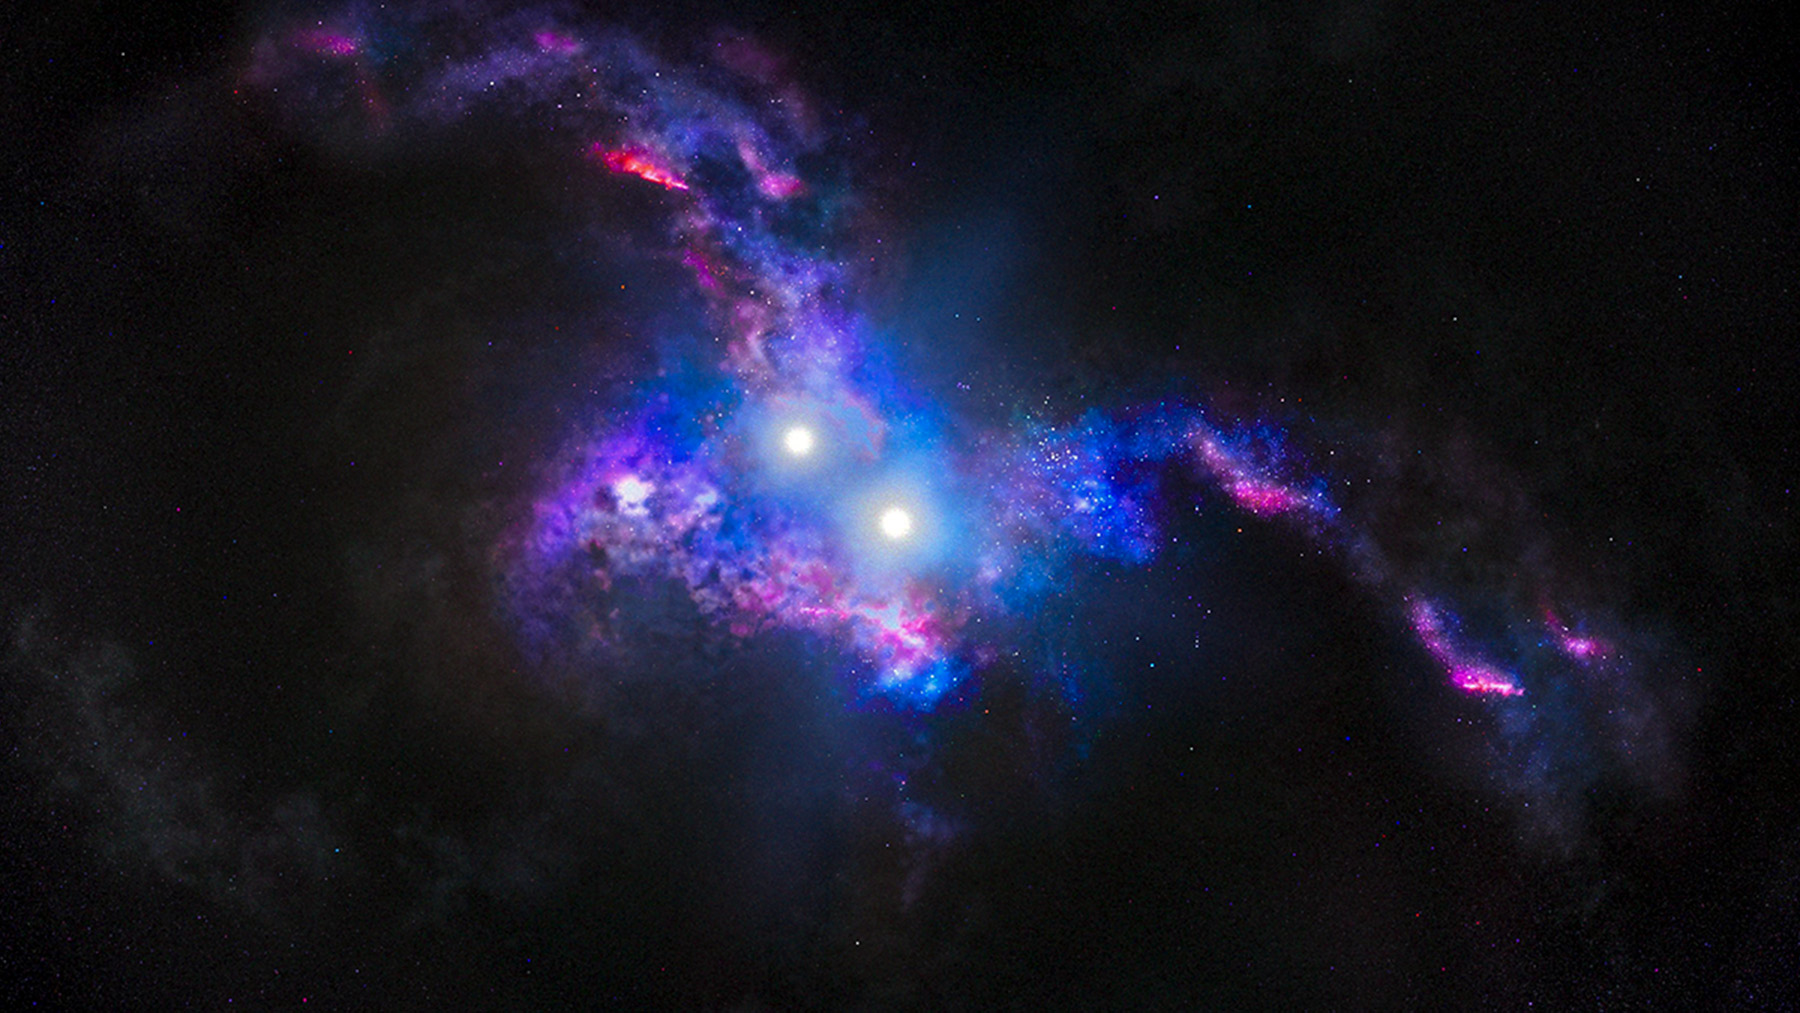 An artist’s conception shows the brilliant light of two quasars residing in the cores of galaxies in the chaotic process of merging. The gravitational tug-of-war between the two galaxies stretches them, forming long tidal tails and igniting a firestorm of star birth.   Graphic courtesy NASA, the European Space Agency and J. Olmstead of the Space Telescope Science Institute.